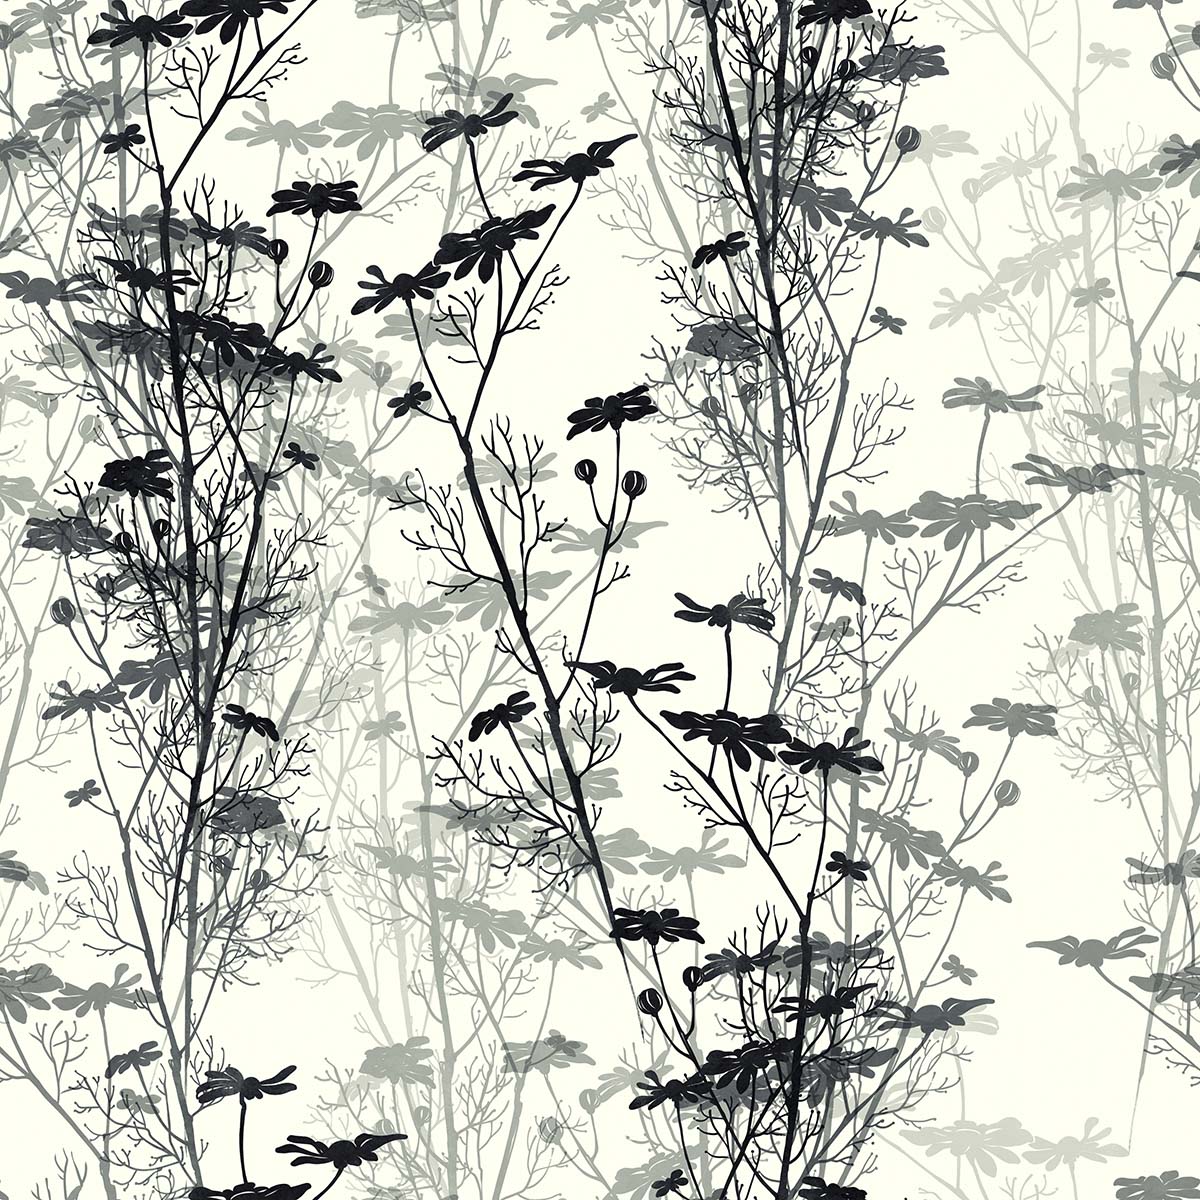 A pattern of flowers and branches